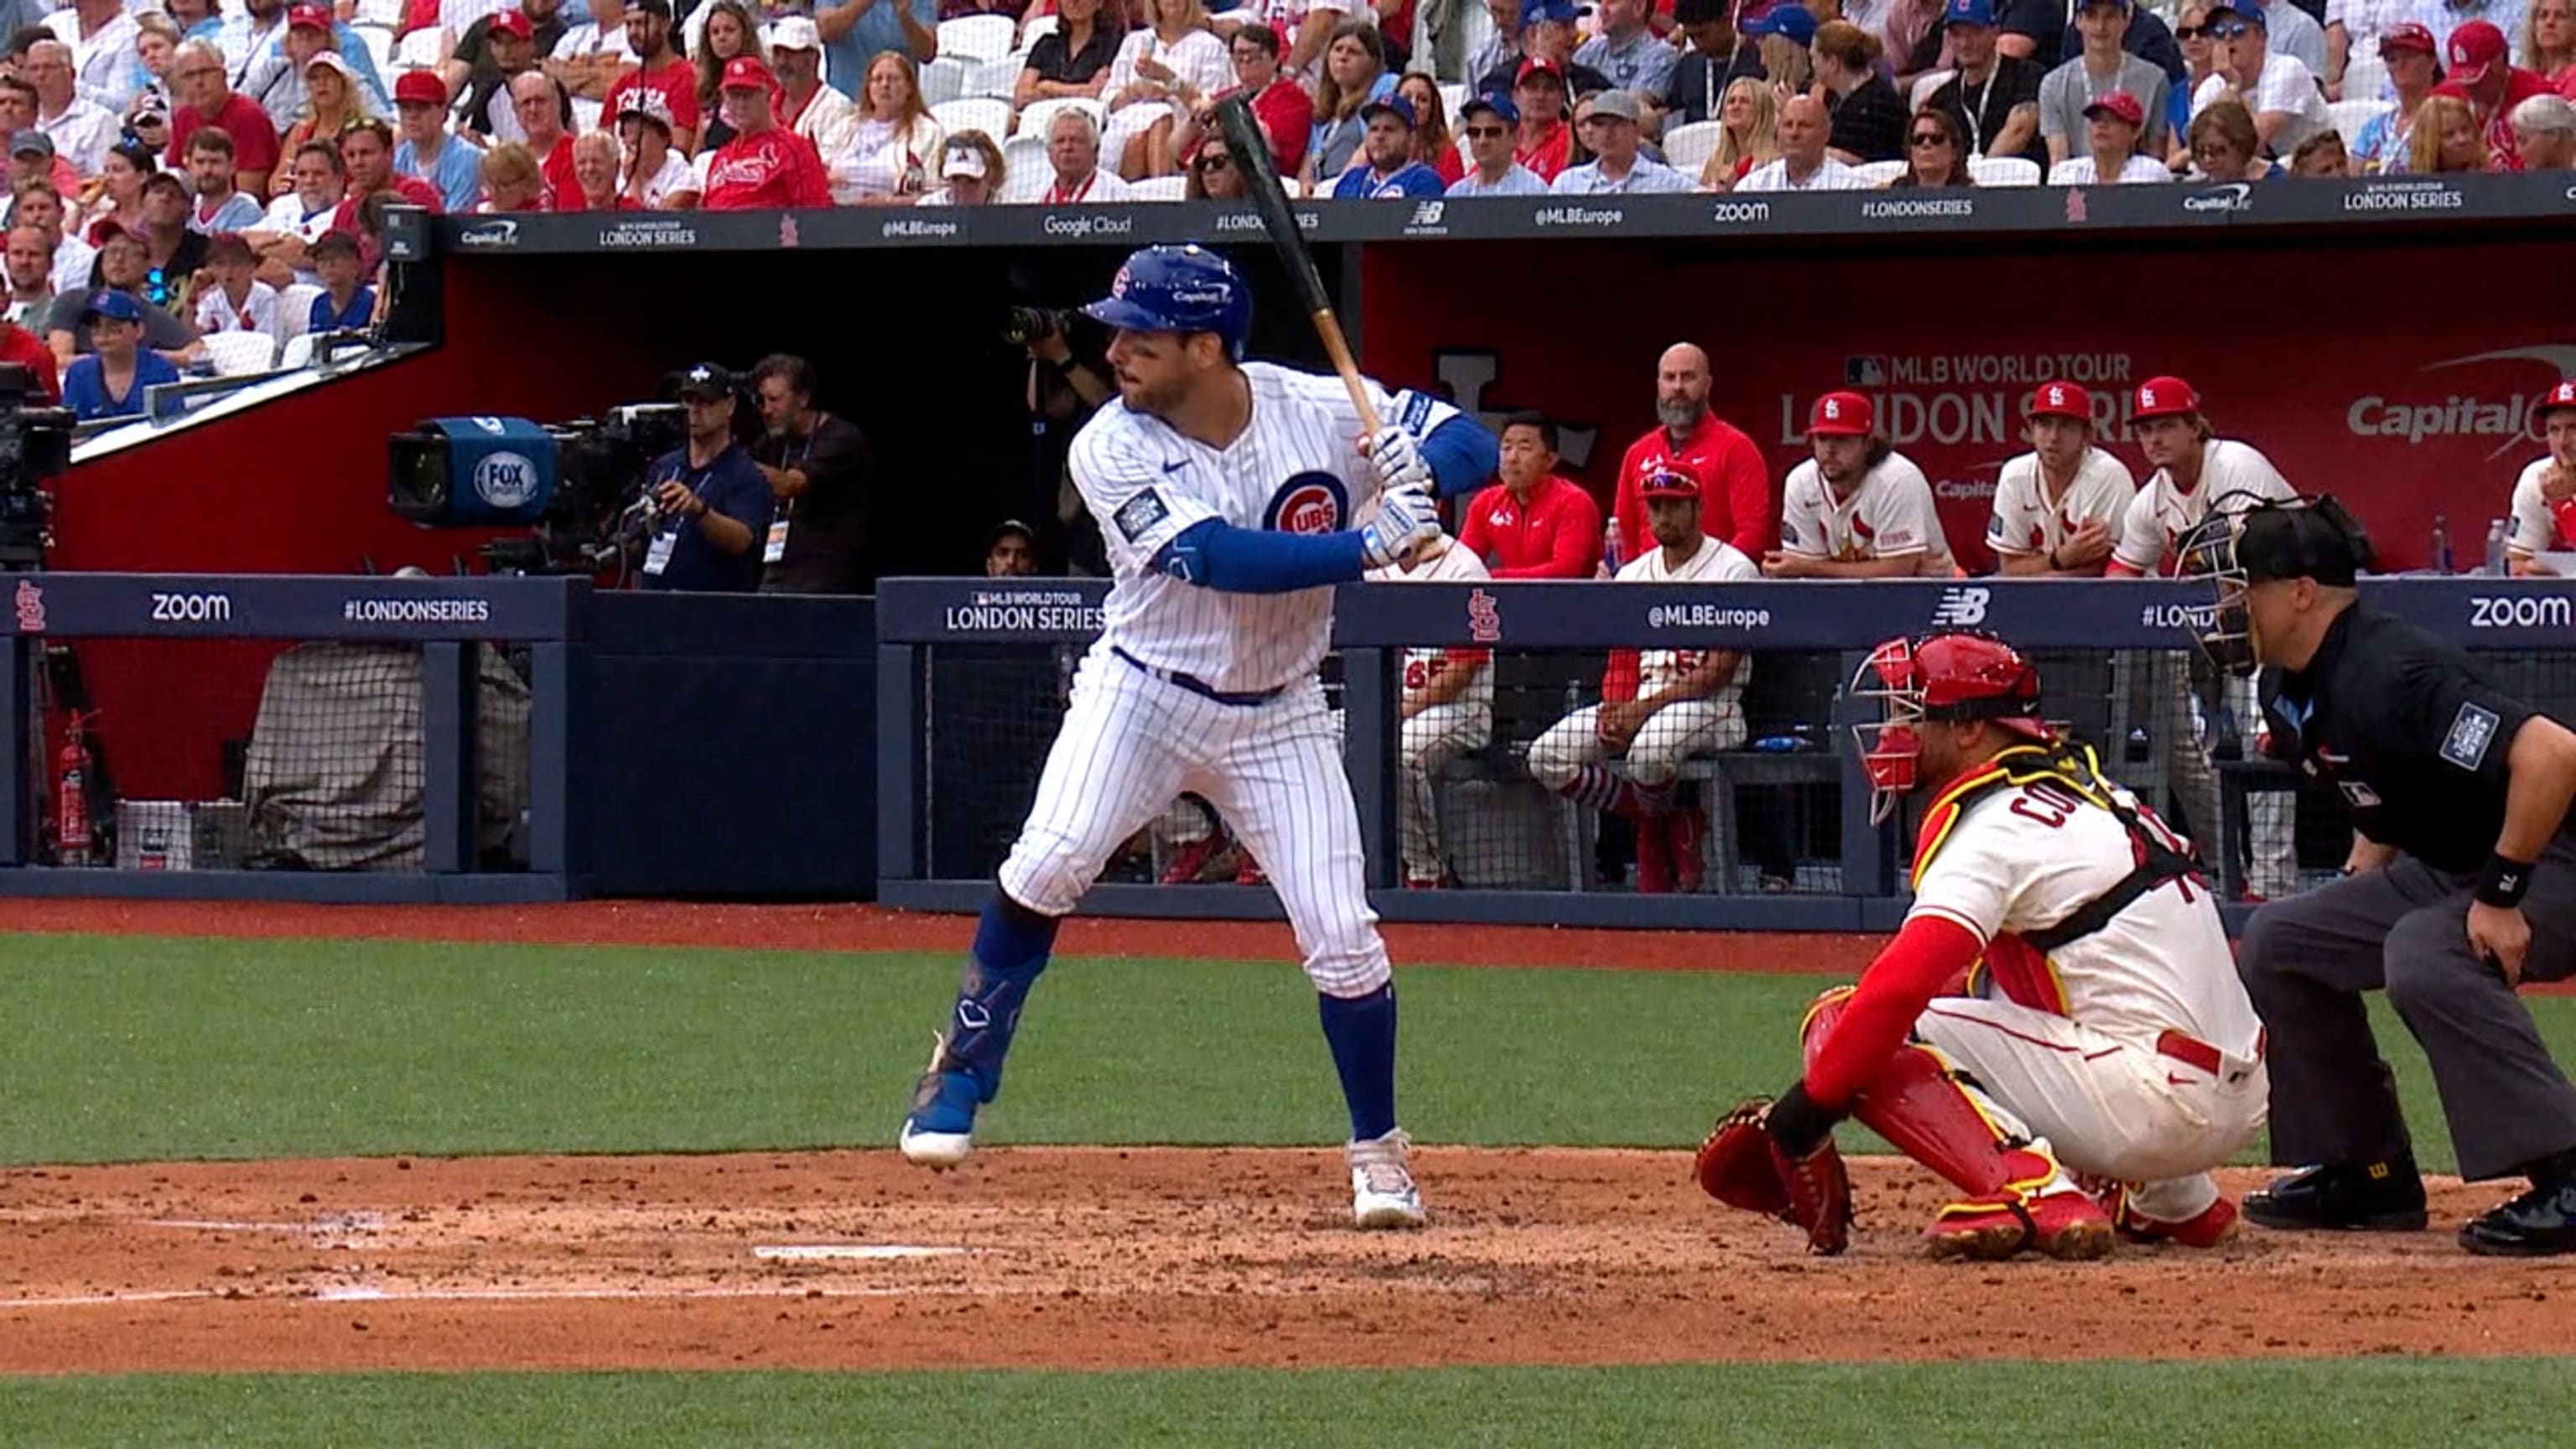 Game Highlights: Steele Deals, Happ Homers Twice in Cubs Win vs. Cardinals  in London